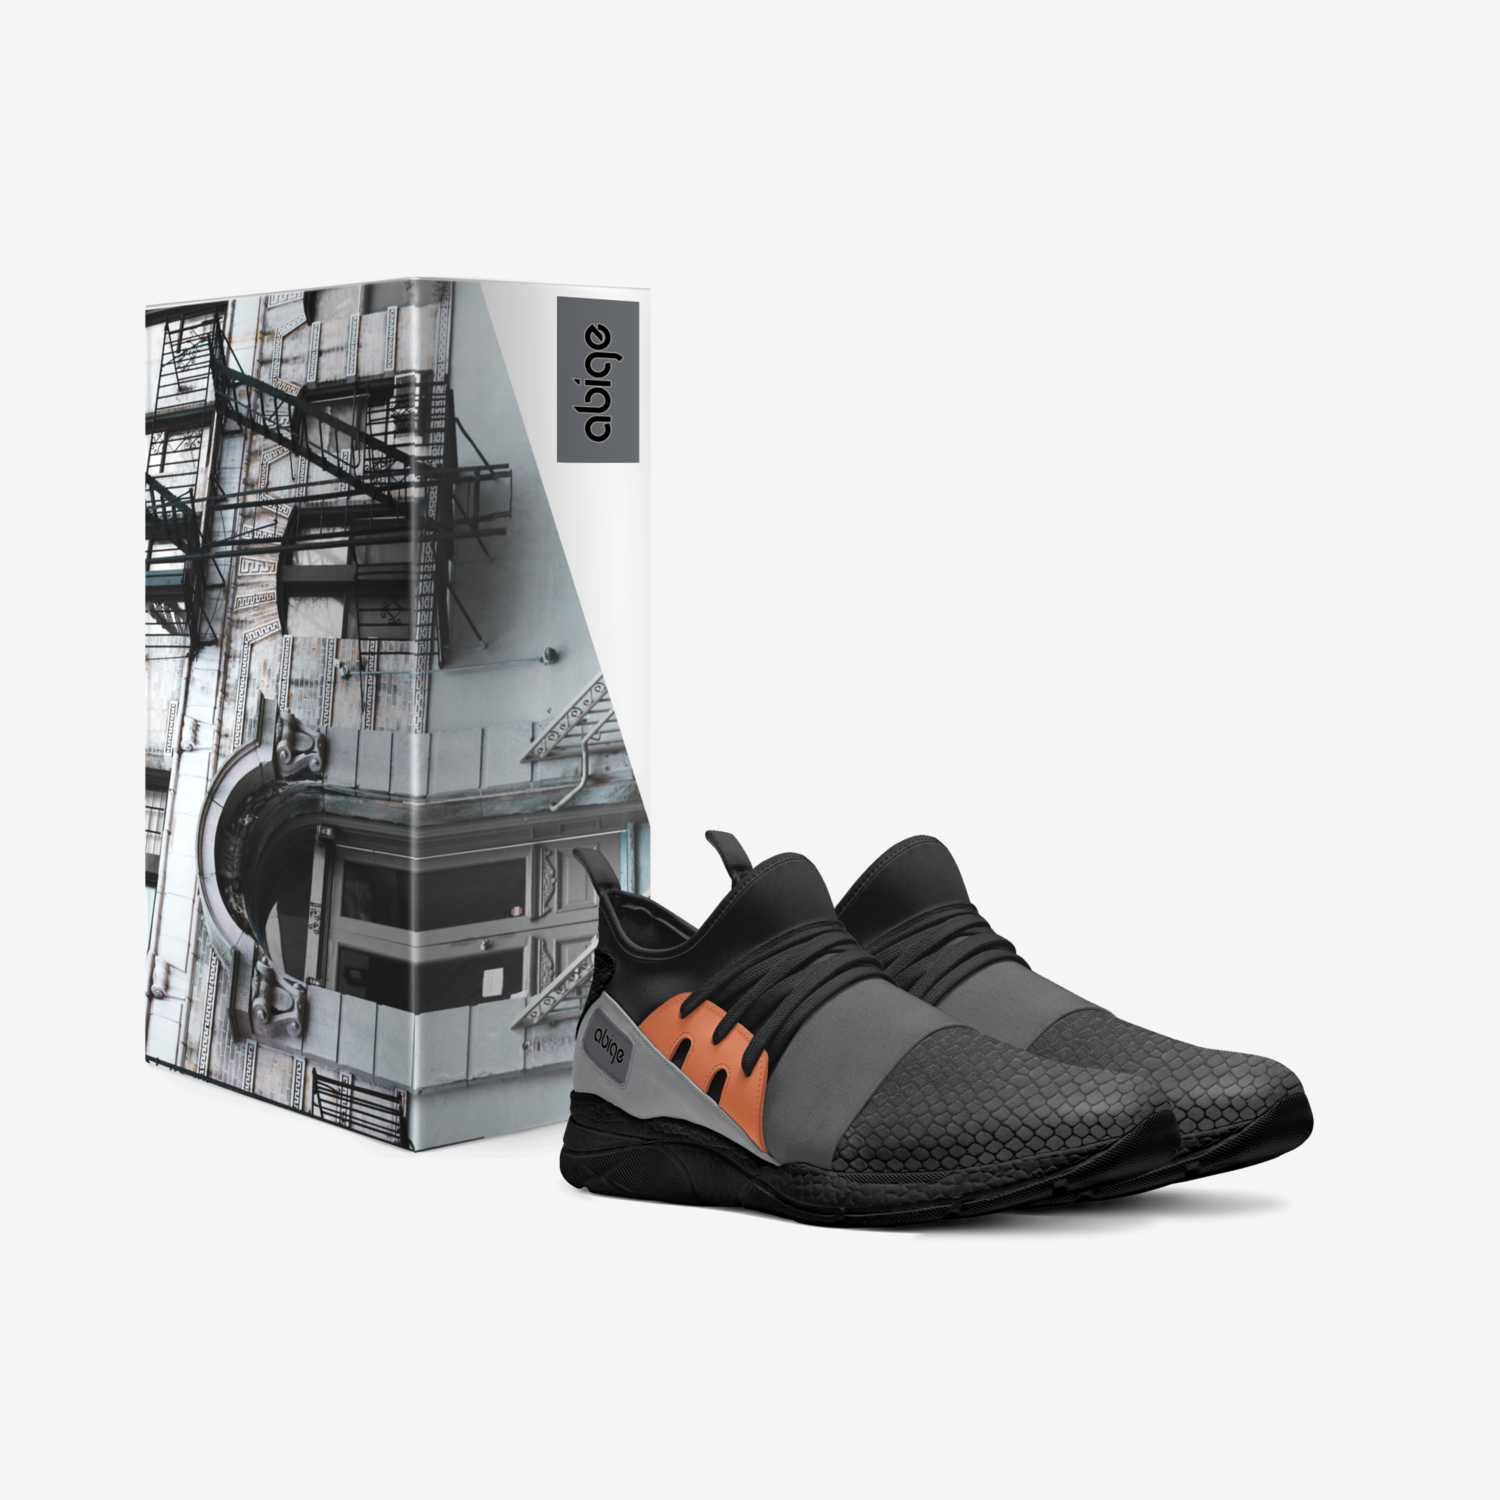 ABIGE-32 custom made in Italy shoes by K.b. : Kingdom Builders | Box view